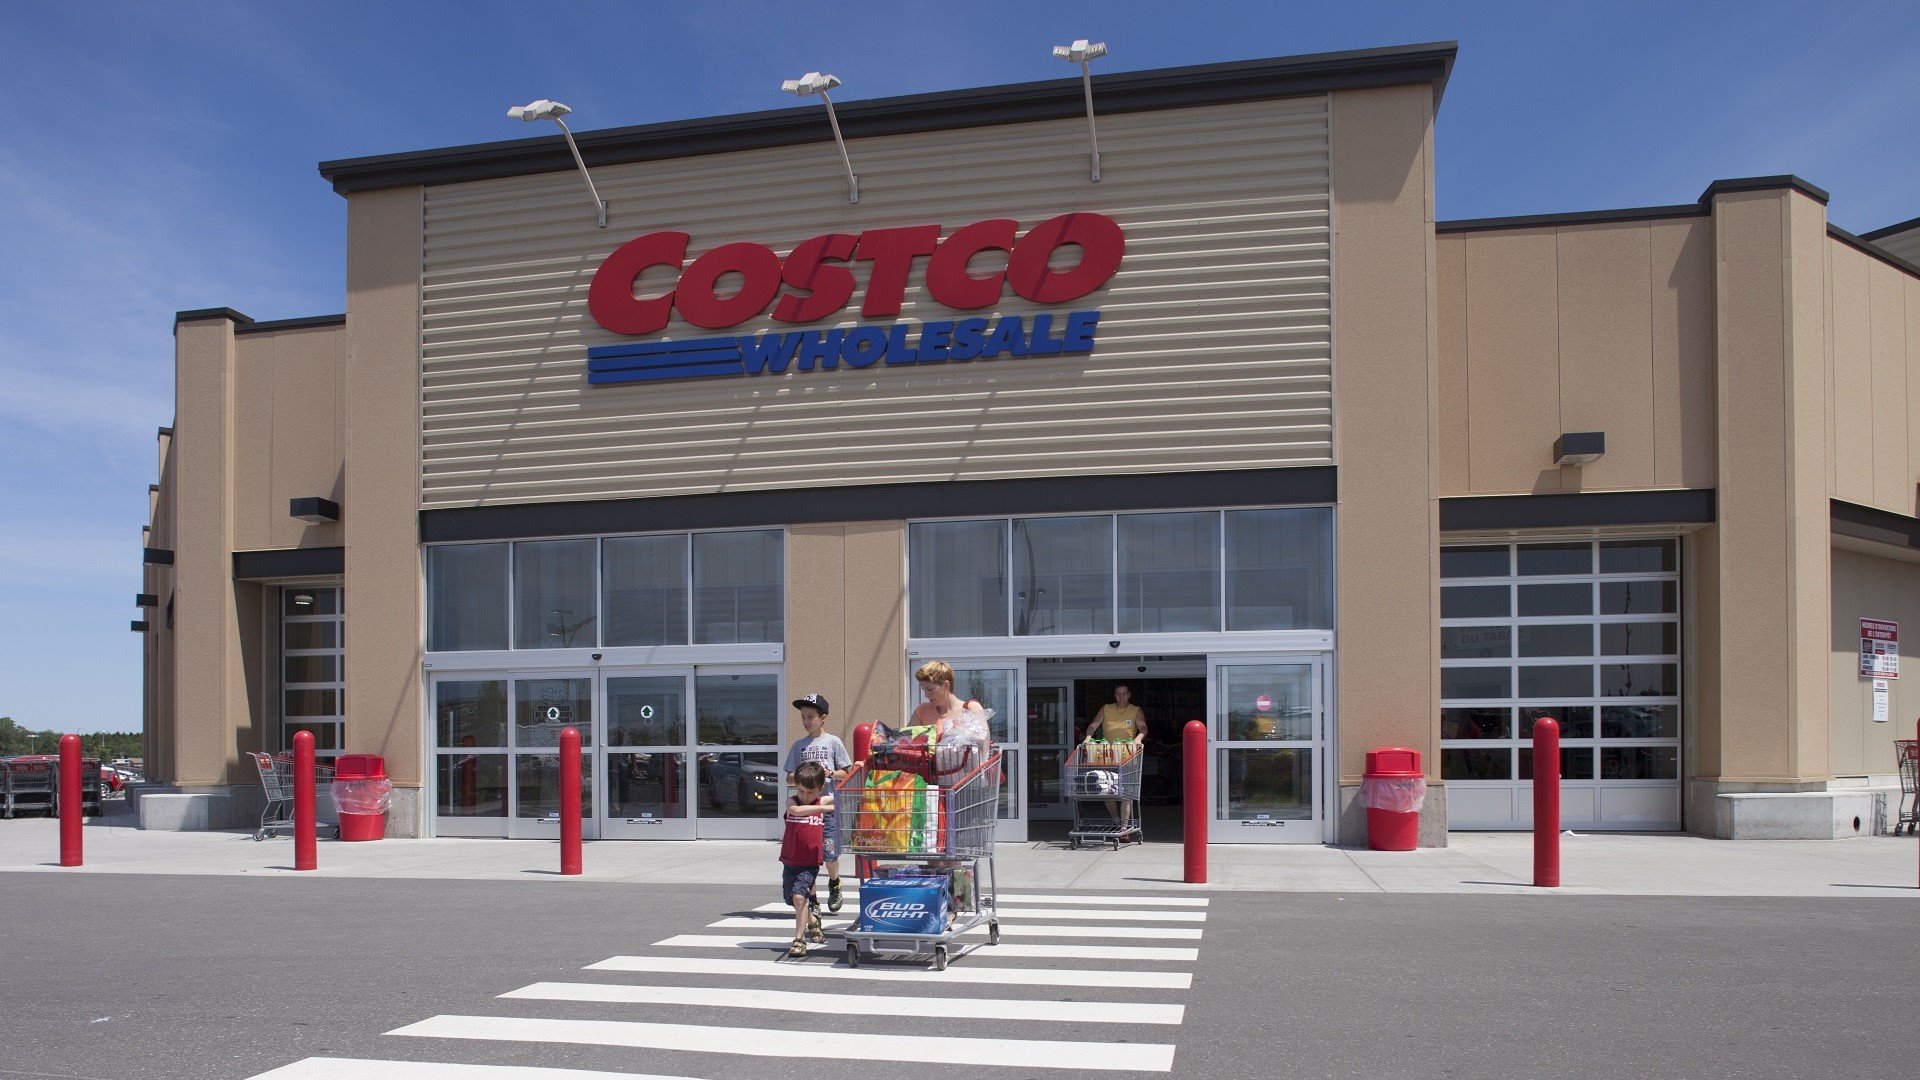 The Best and Worst Things To Buy Generic at Costco